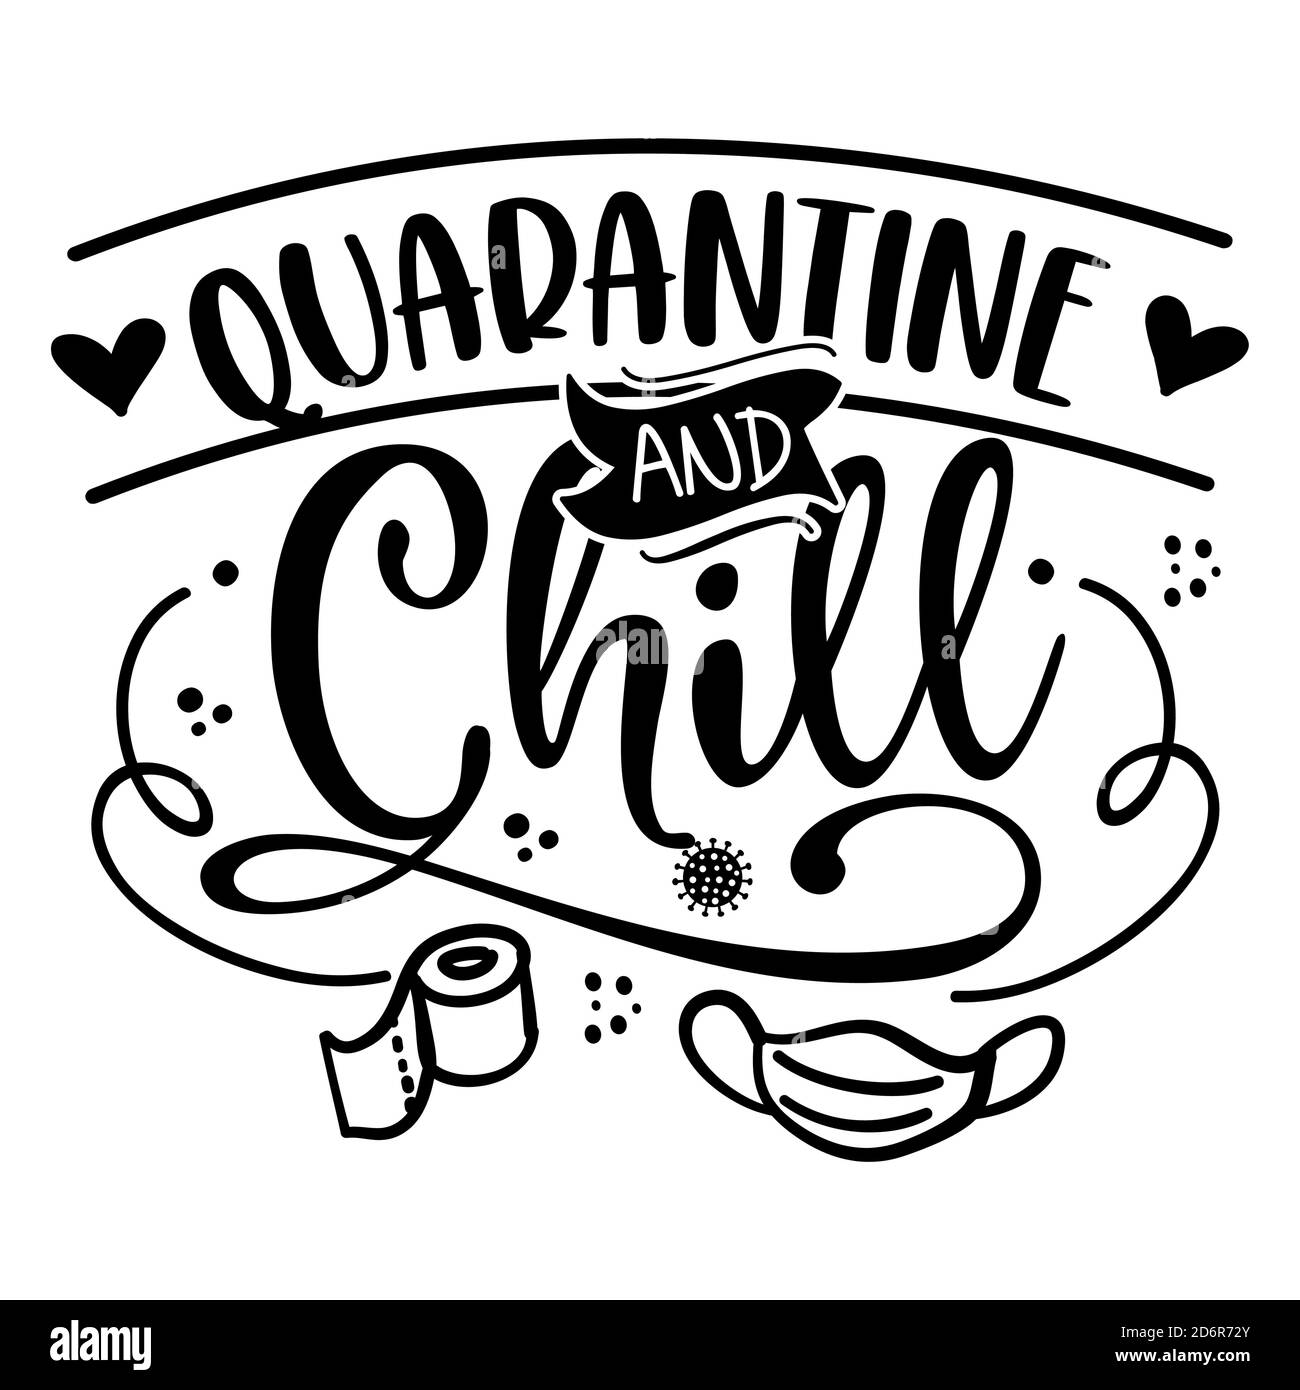 Quarantine and Chill - Lettering typography poster with text for self quarantine times. Hand letter script motivation sign catch word art design. Vint Stock Vector